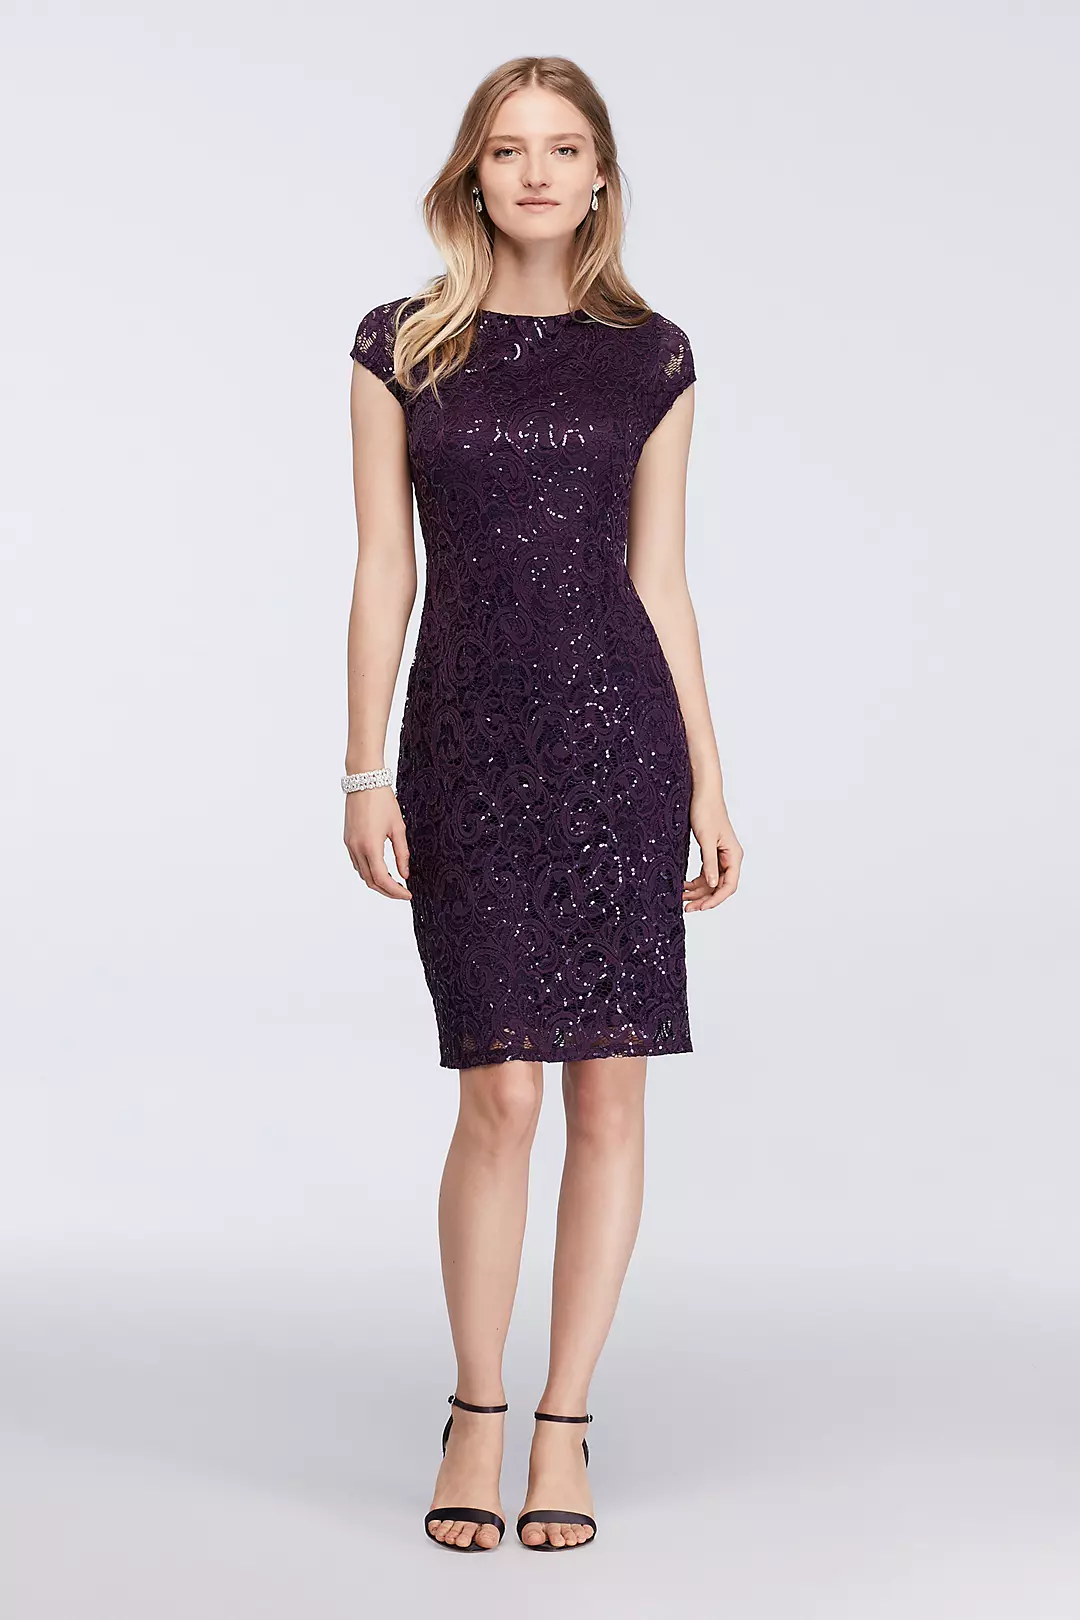 Sequined Cap Sleeve Short Lace Dress Image